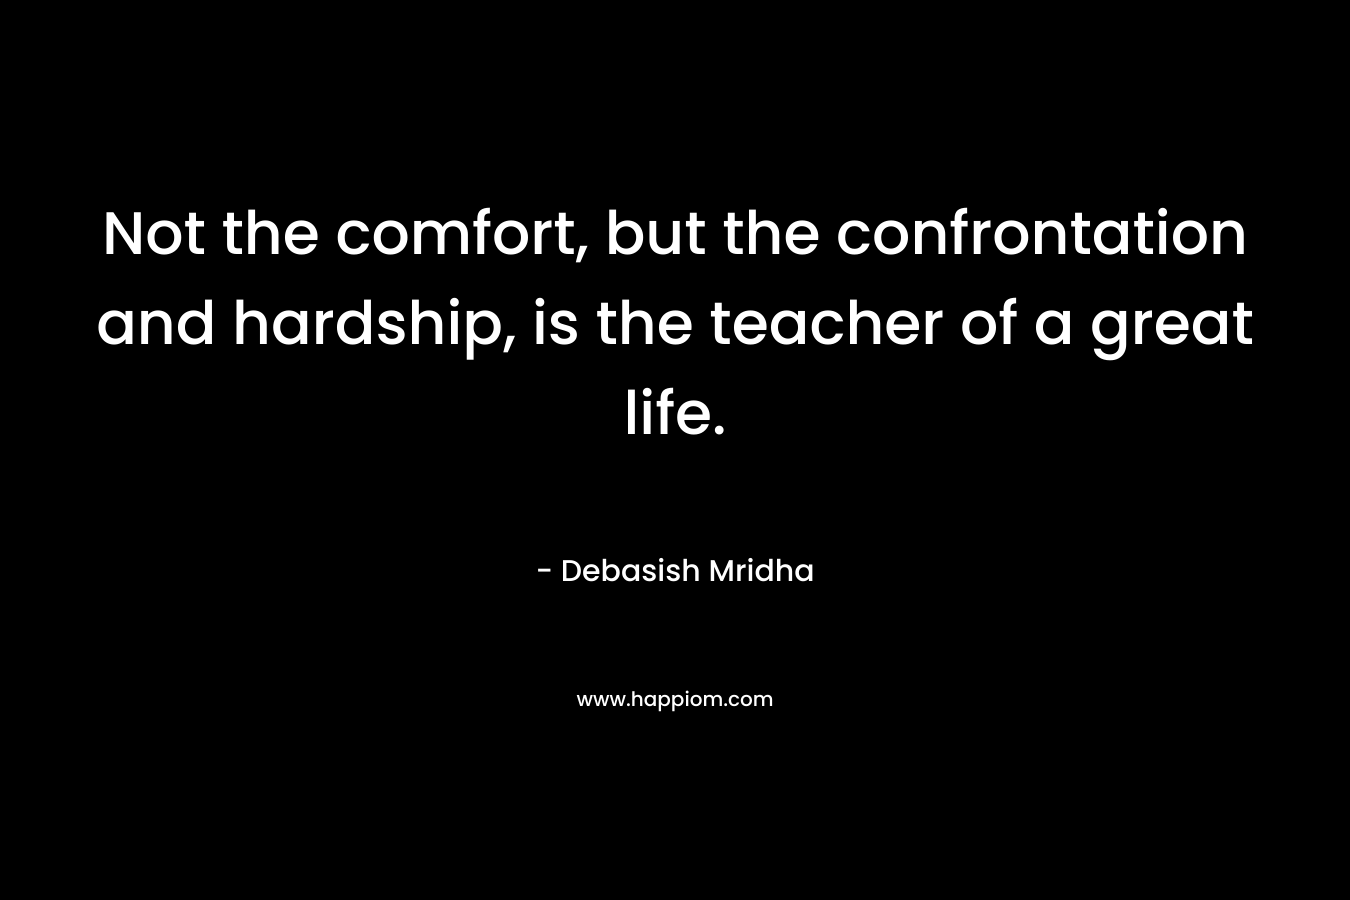 Not the comfort, but the confrontation and hardship, is the teacher of a great life.